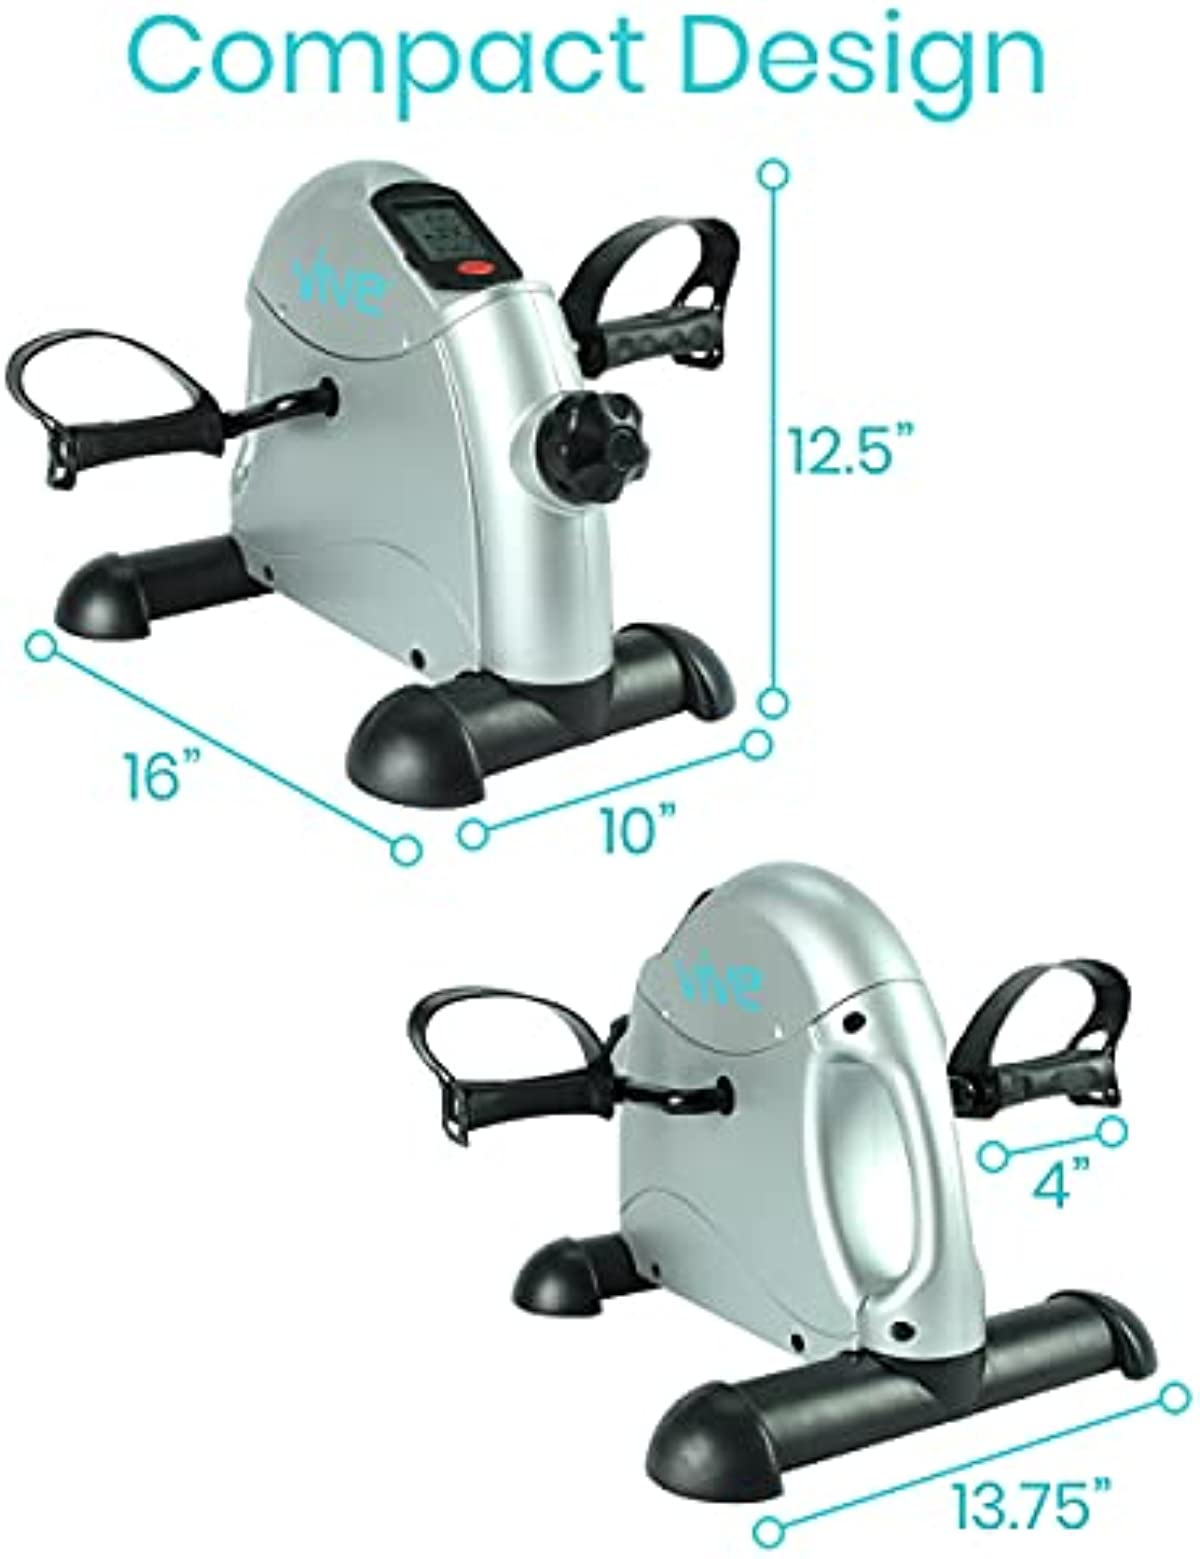 Vive Pedal Exerciser - Stationary Exercise Leg Peddler - Low Impact, Portable Mini Cycle Bike for Under Your Office Desk - Slim Design for Arm or Foot - Small, Sitdown Recumbent Equipment Machine